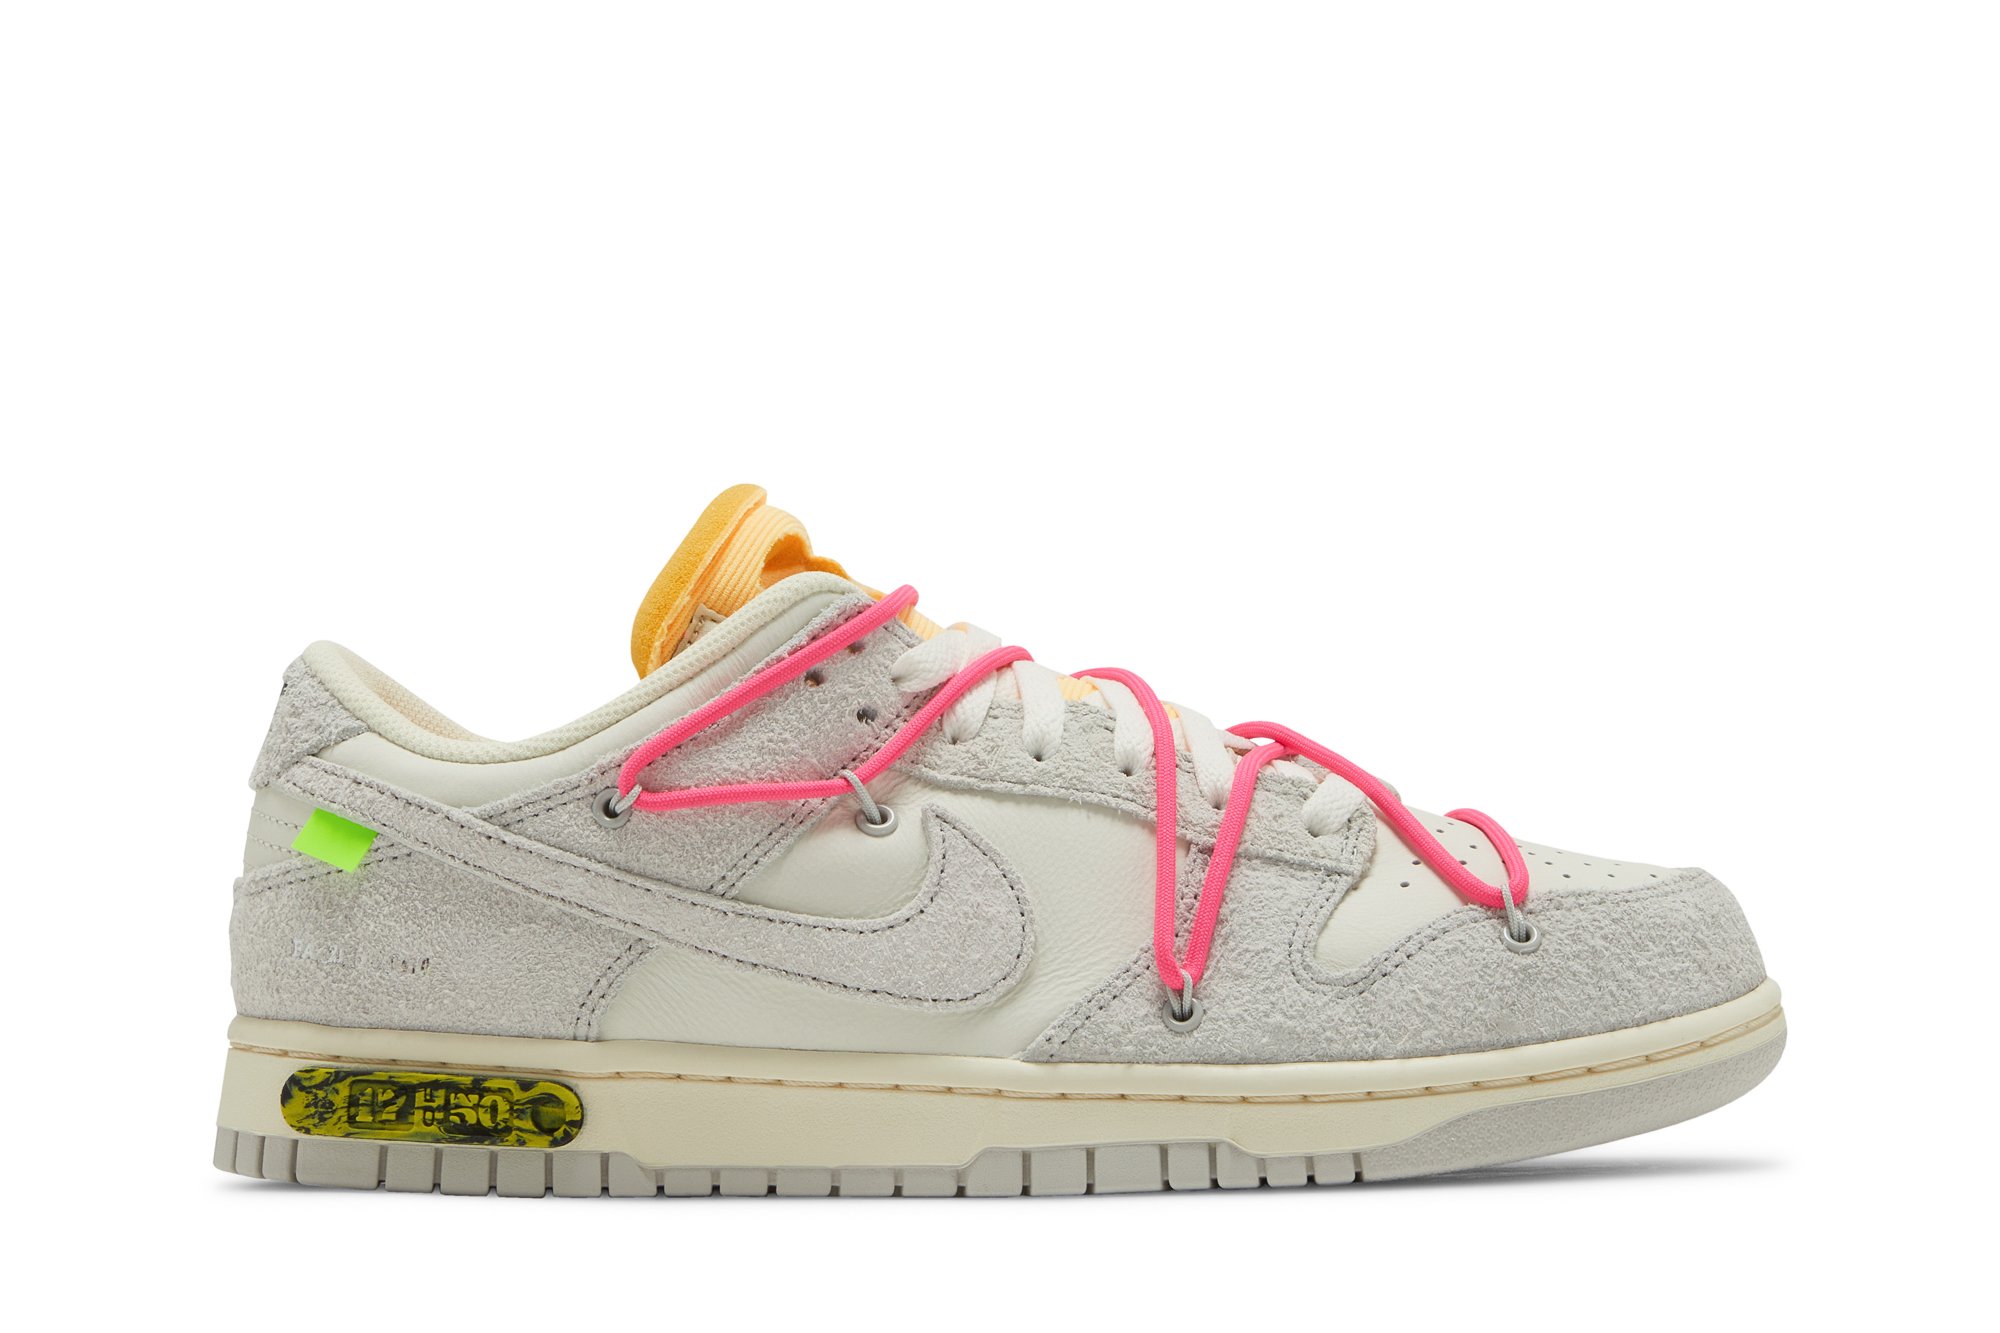 Buy Off-White x Dunk Low 'Lot 17 of 50' - DJ0950 117 | GOAT